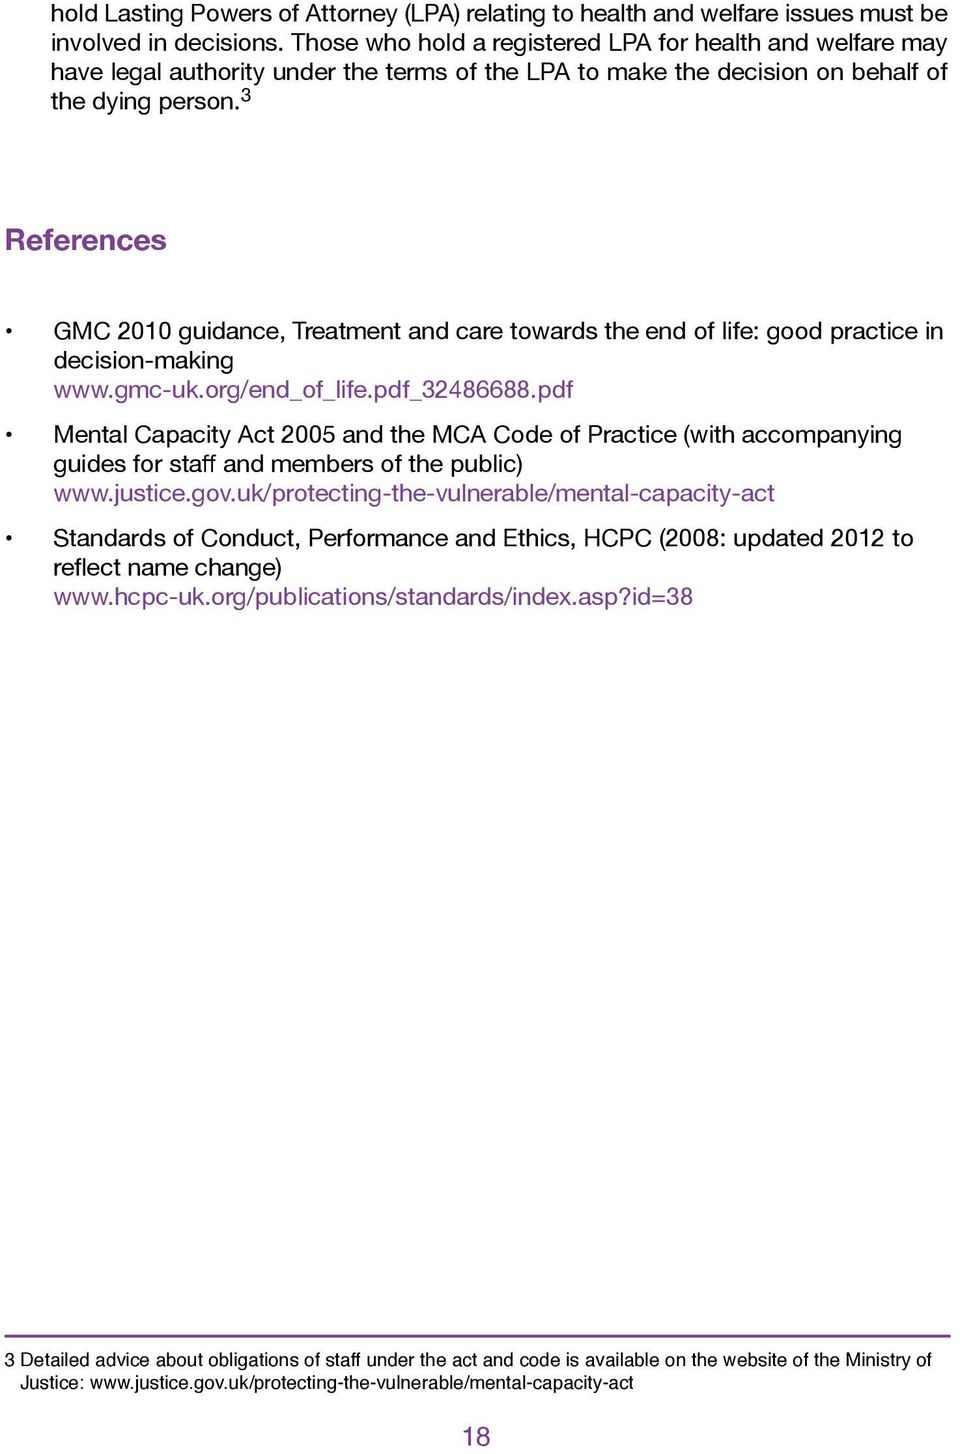 3 References GMC 2010 guidance, Treatment and care towards the end of life: good practice in decision-making www.gmc-uk.org/end_of_life.pdf_32486688.